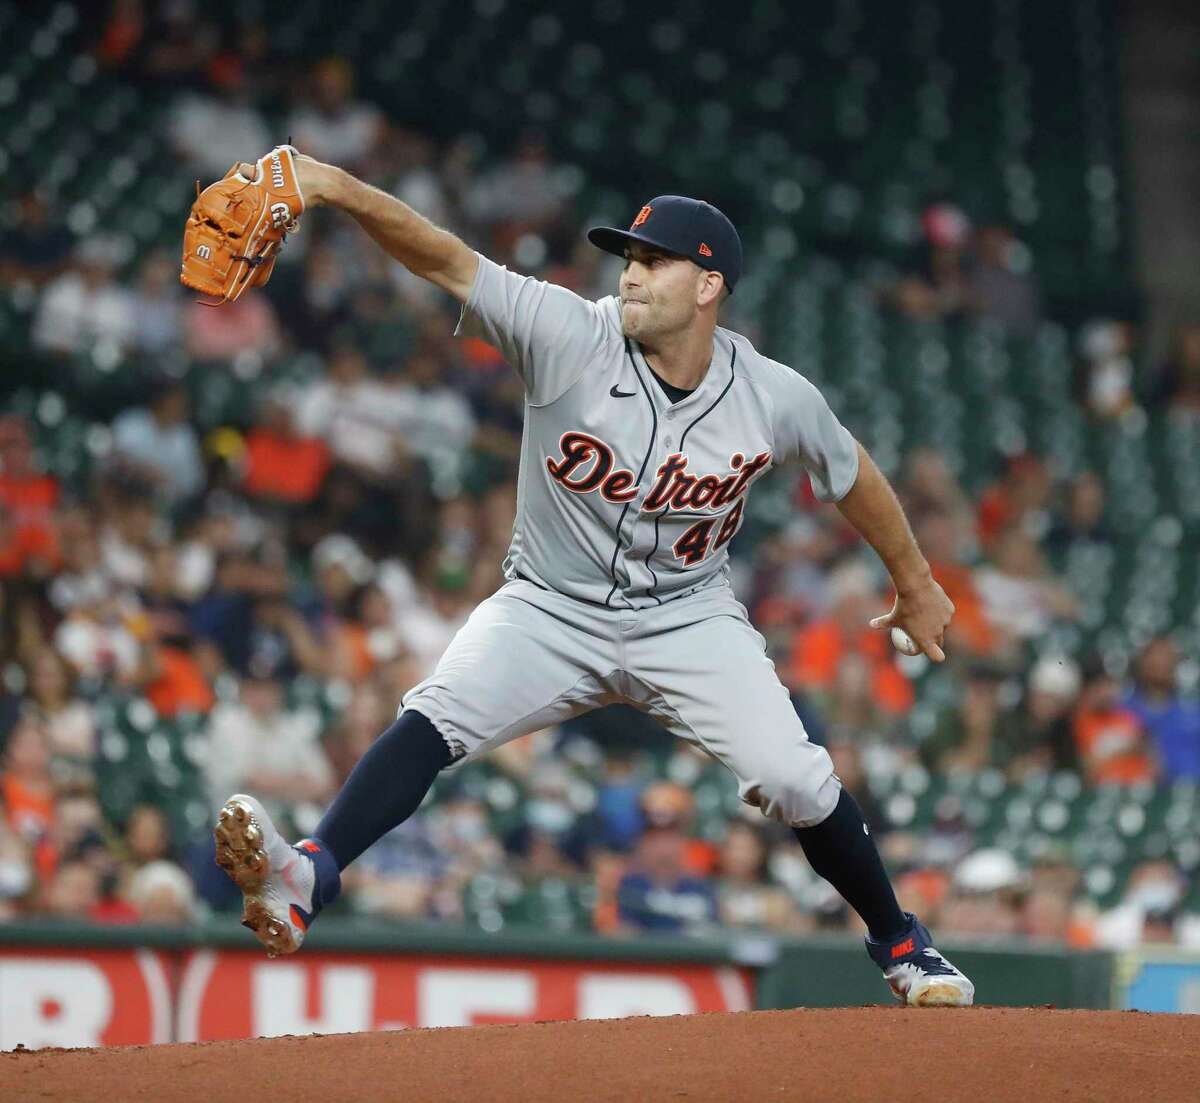 Detroit Tigers starting pitcher Matthew Boyd (48) pitches during the second inning of an MLB baseball game at Minute Maid Park, in Houston, Tuesday, April 13, 2021.